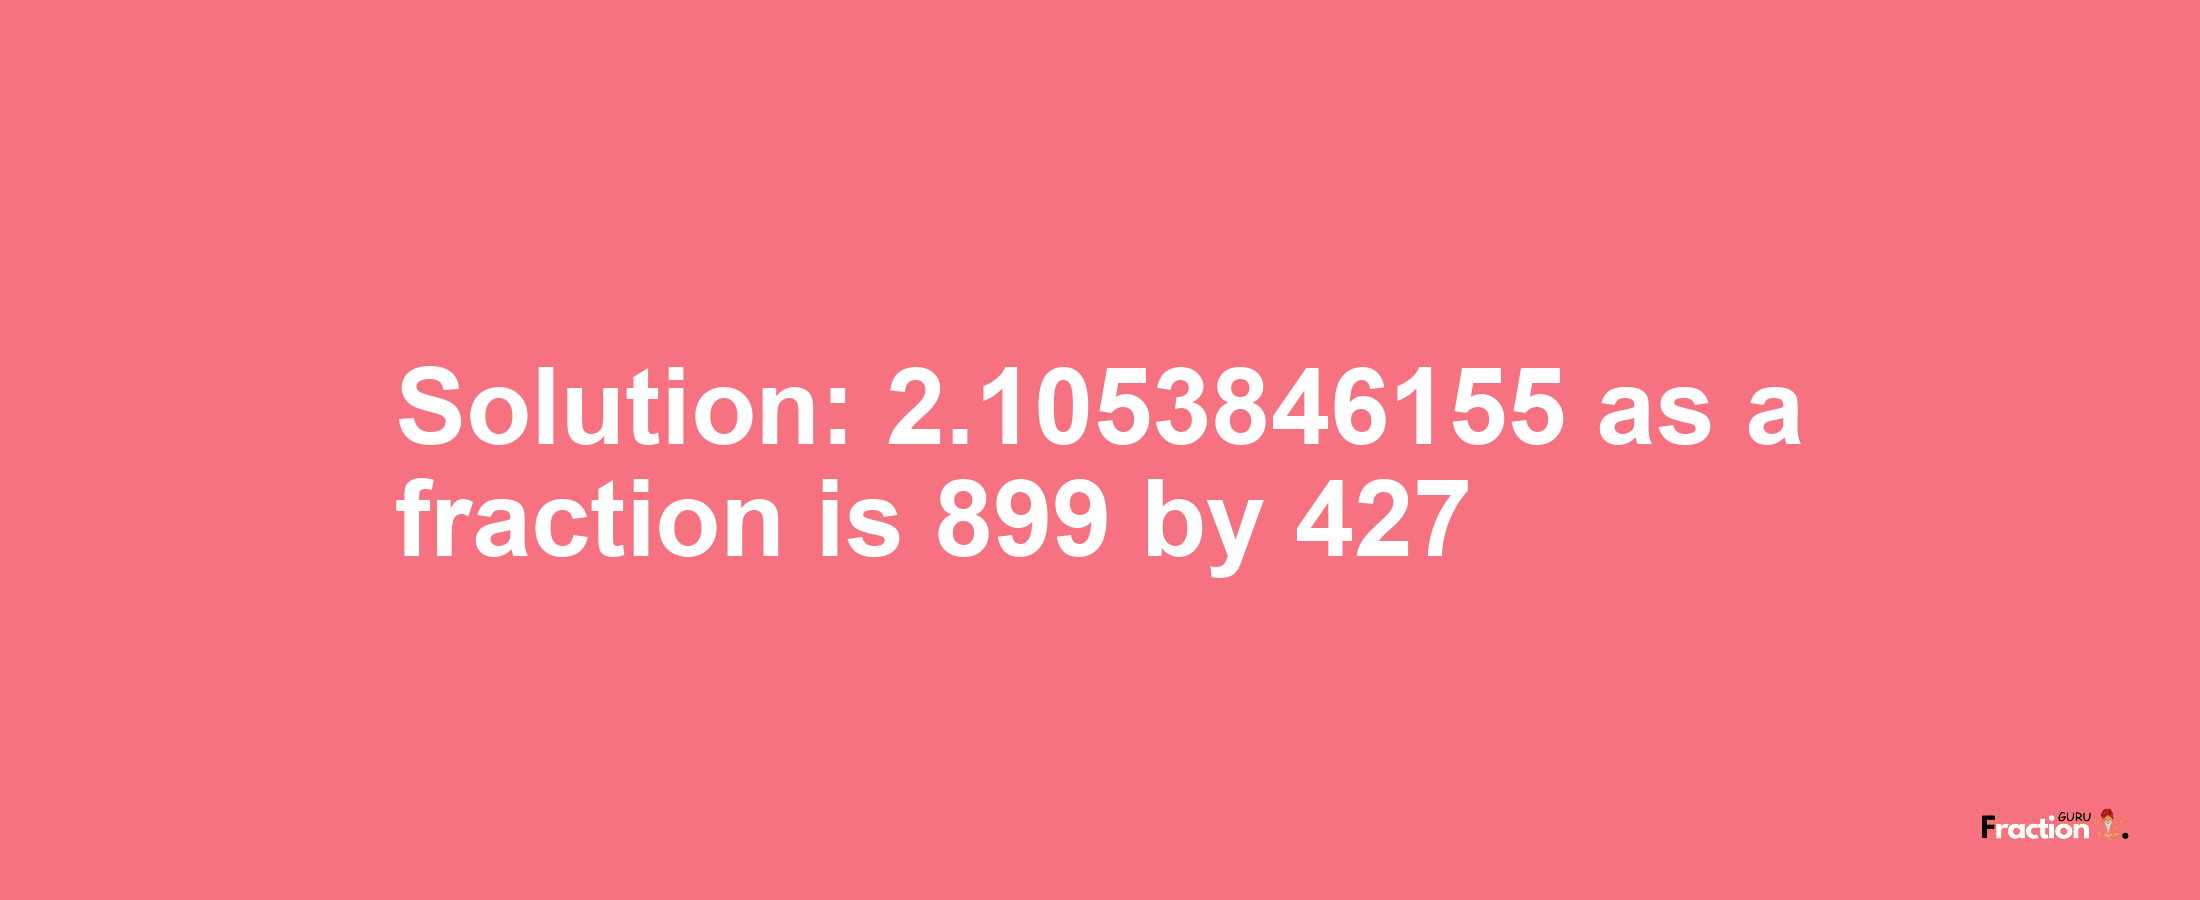 Solution:2.1053846155 as a fraction is 899/427